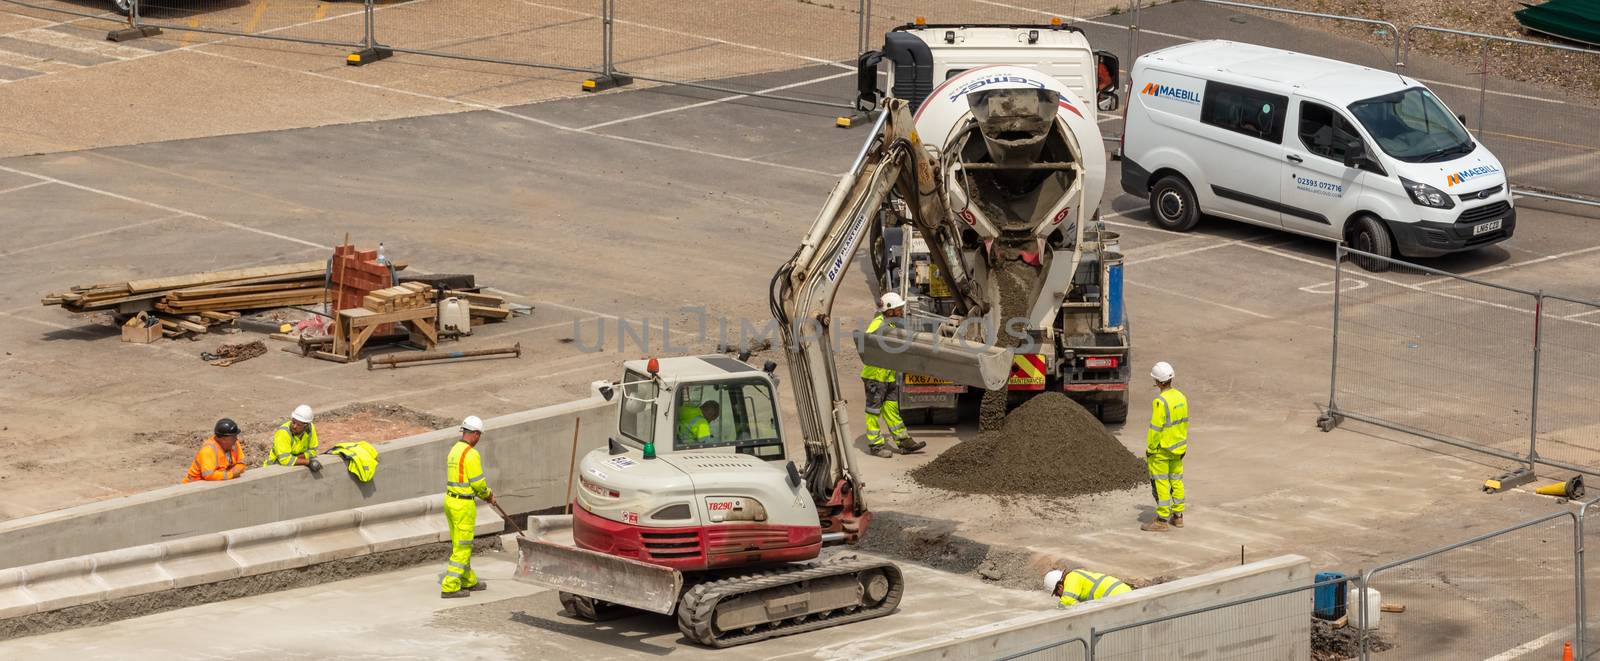 Southampton port, England, UK - June 08, 2020: Construction workers wearing light green safety clothing and hard hats on site. Excavator, concrete mixer. Construction concept.